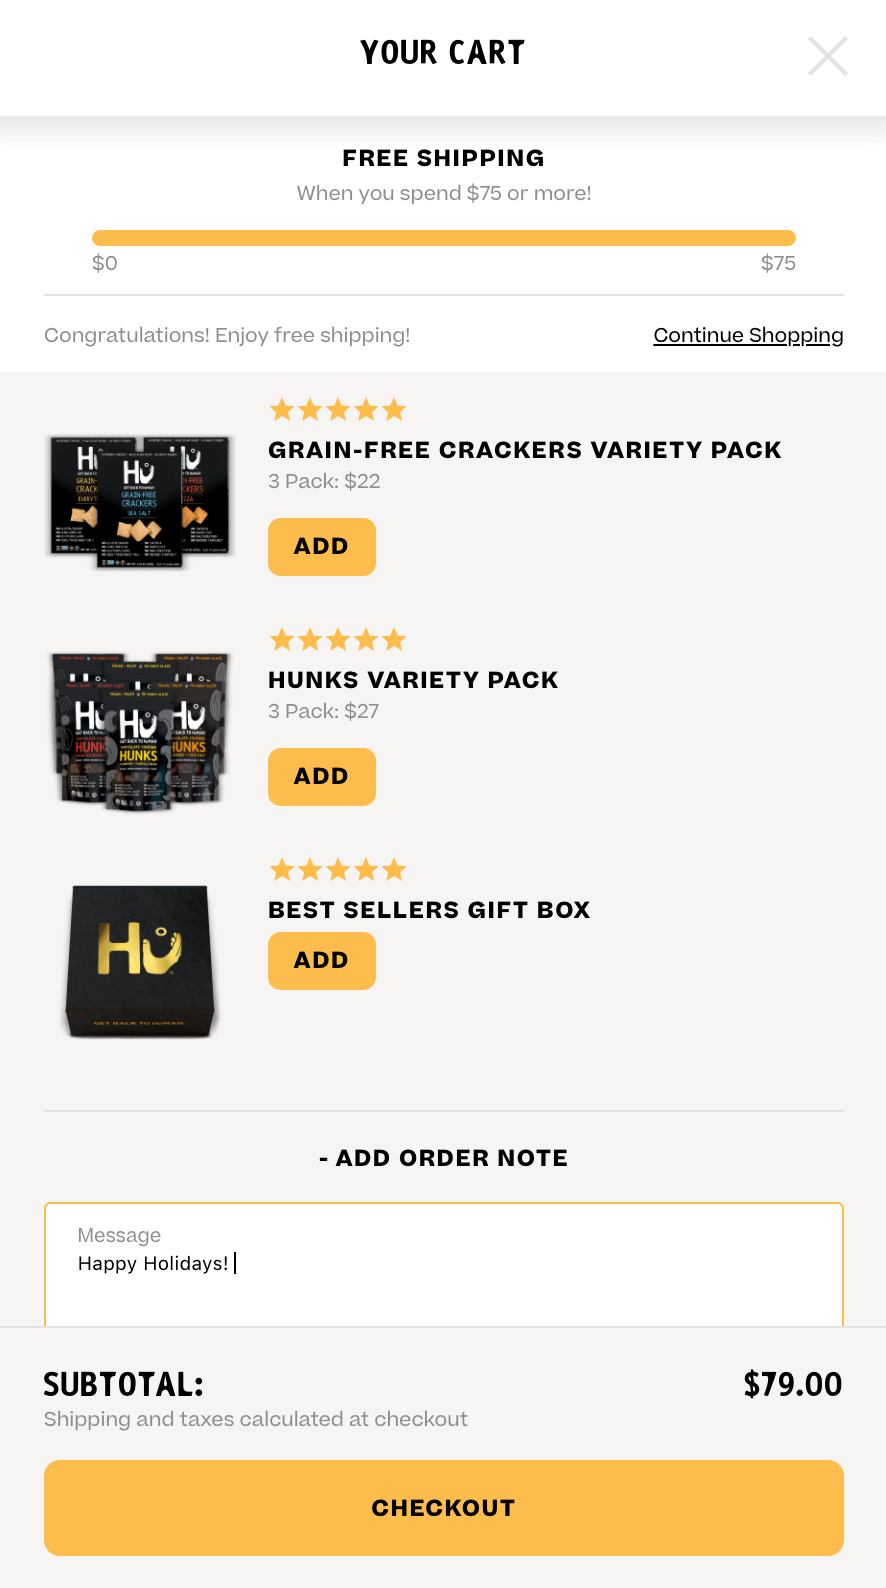 Hu’s cart with “add order note” option.